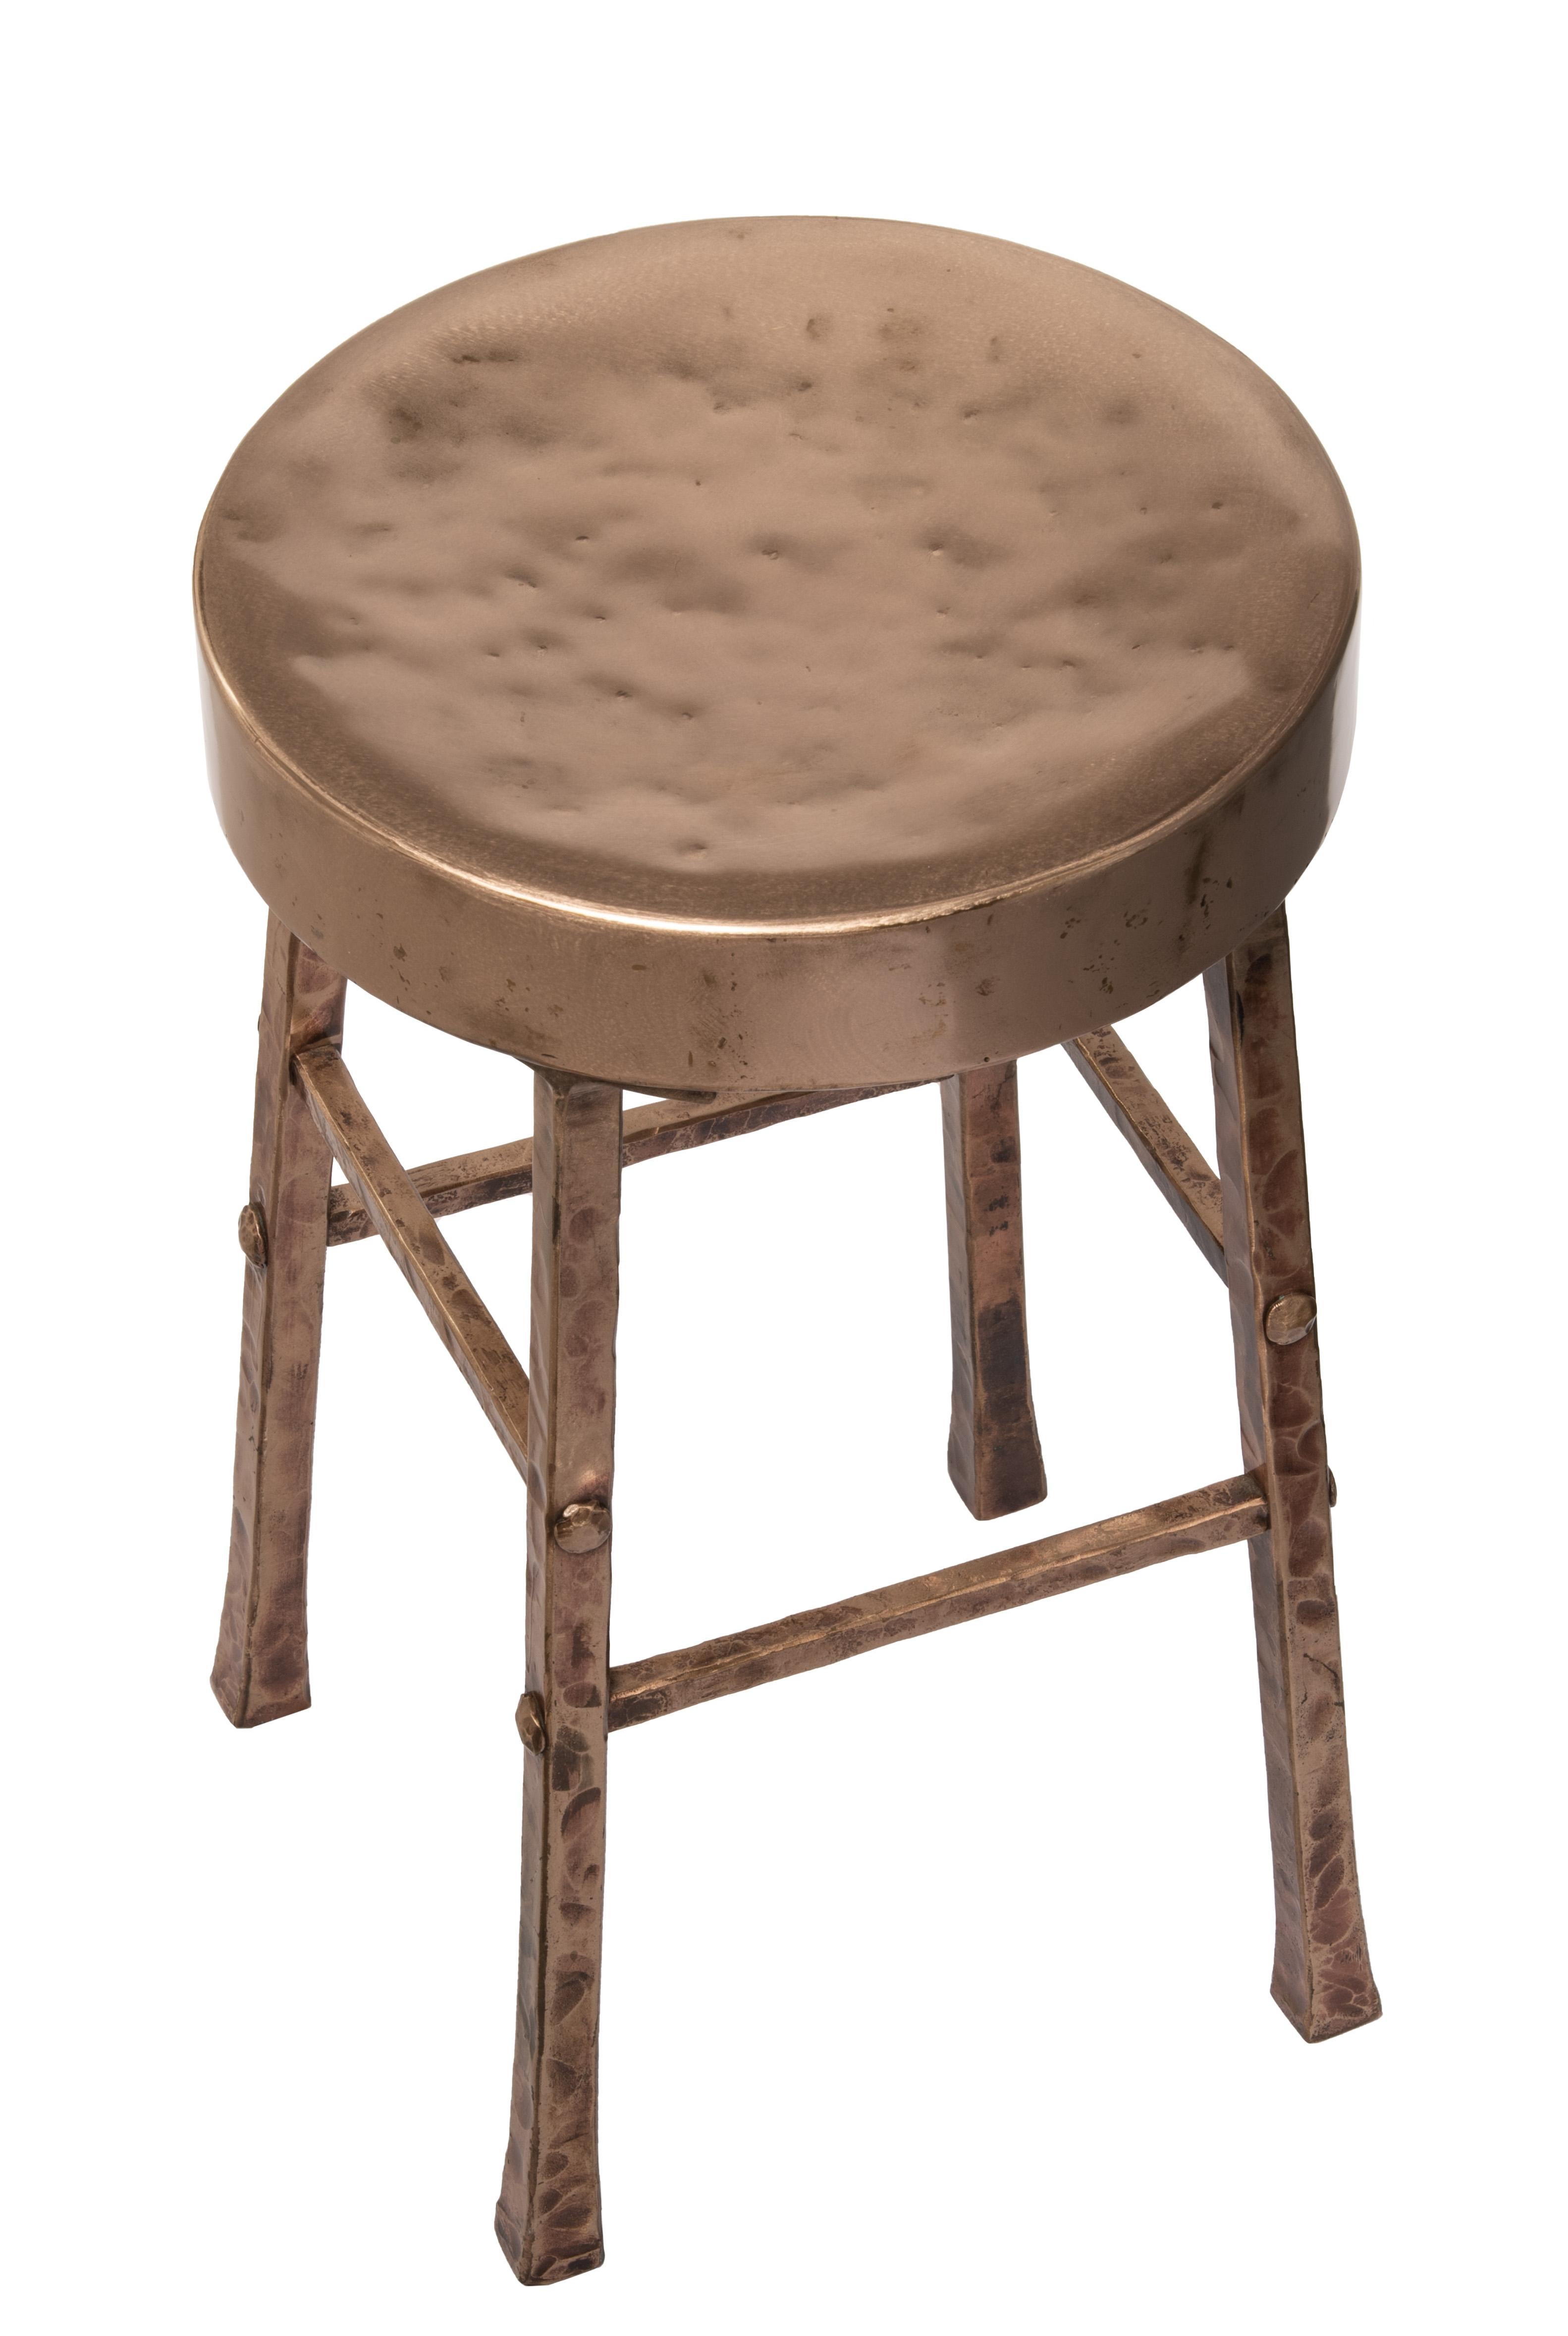 American Round Bronze Stool with Forged and Hammered Bronze Legs For Sale